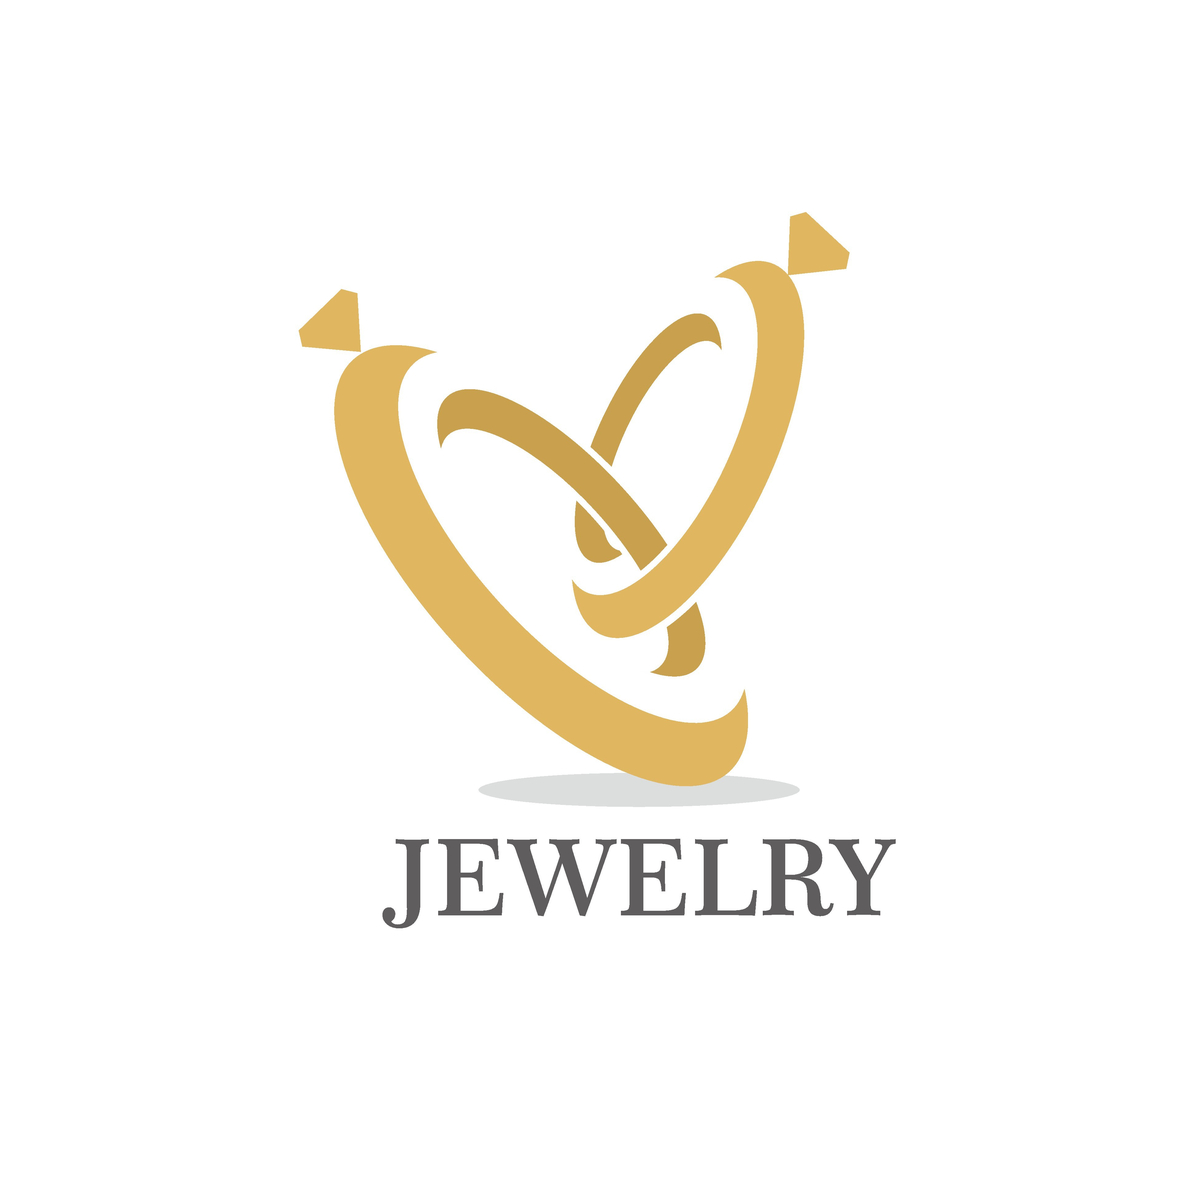 Best Jewellery Logo Design Ideas for Your Need | Vowels India